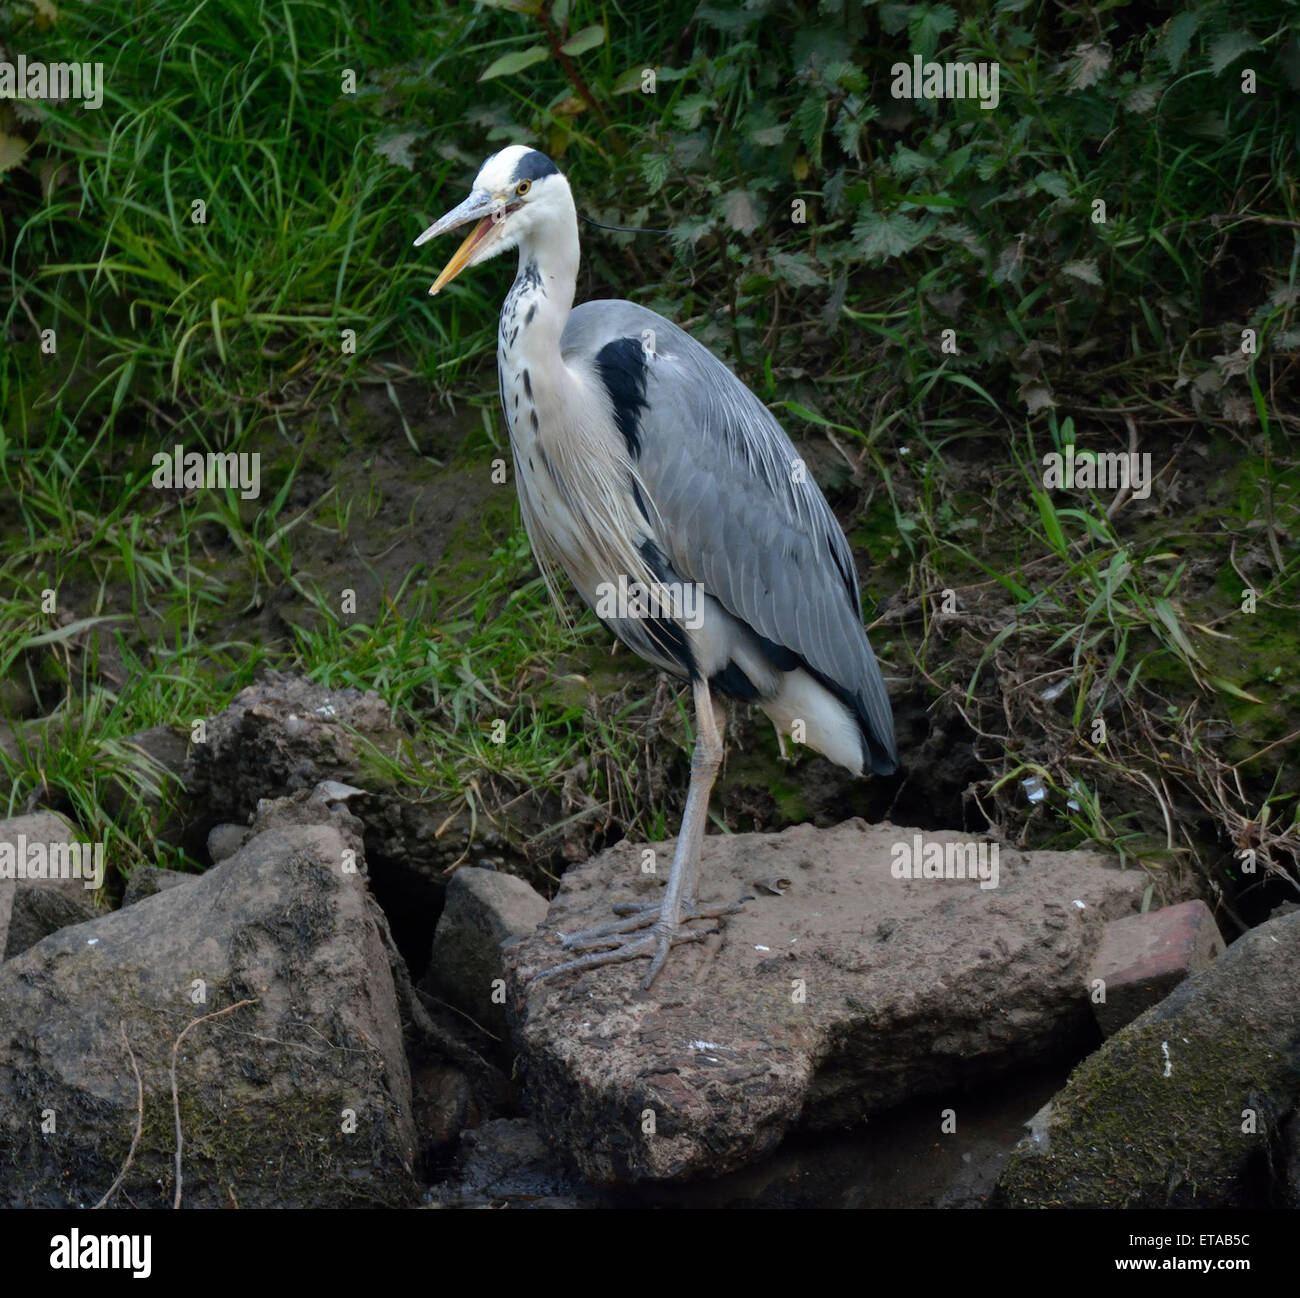 Manchester, UK  12th June 2015 A grey heron searches for fish along the River Mersey as it flows  between Northenden and Didsbury in South Manchester. Grey Heron Search for Food  Manchester, UK Credit:  John Fryer/Alamy Live News Stock Photo